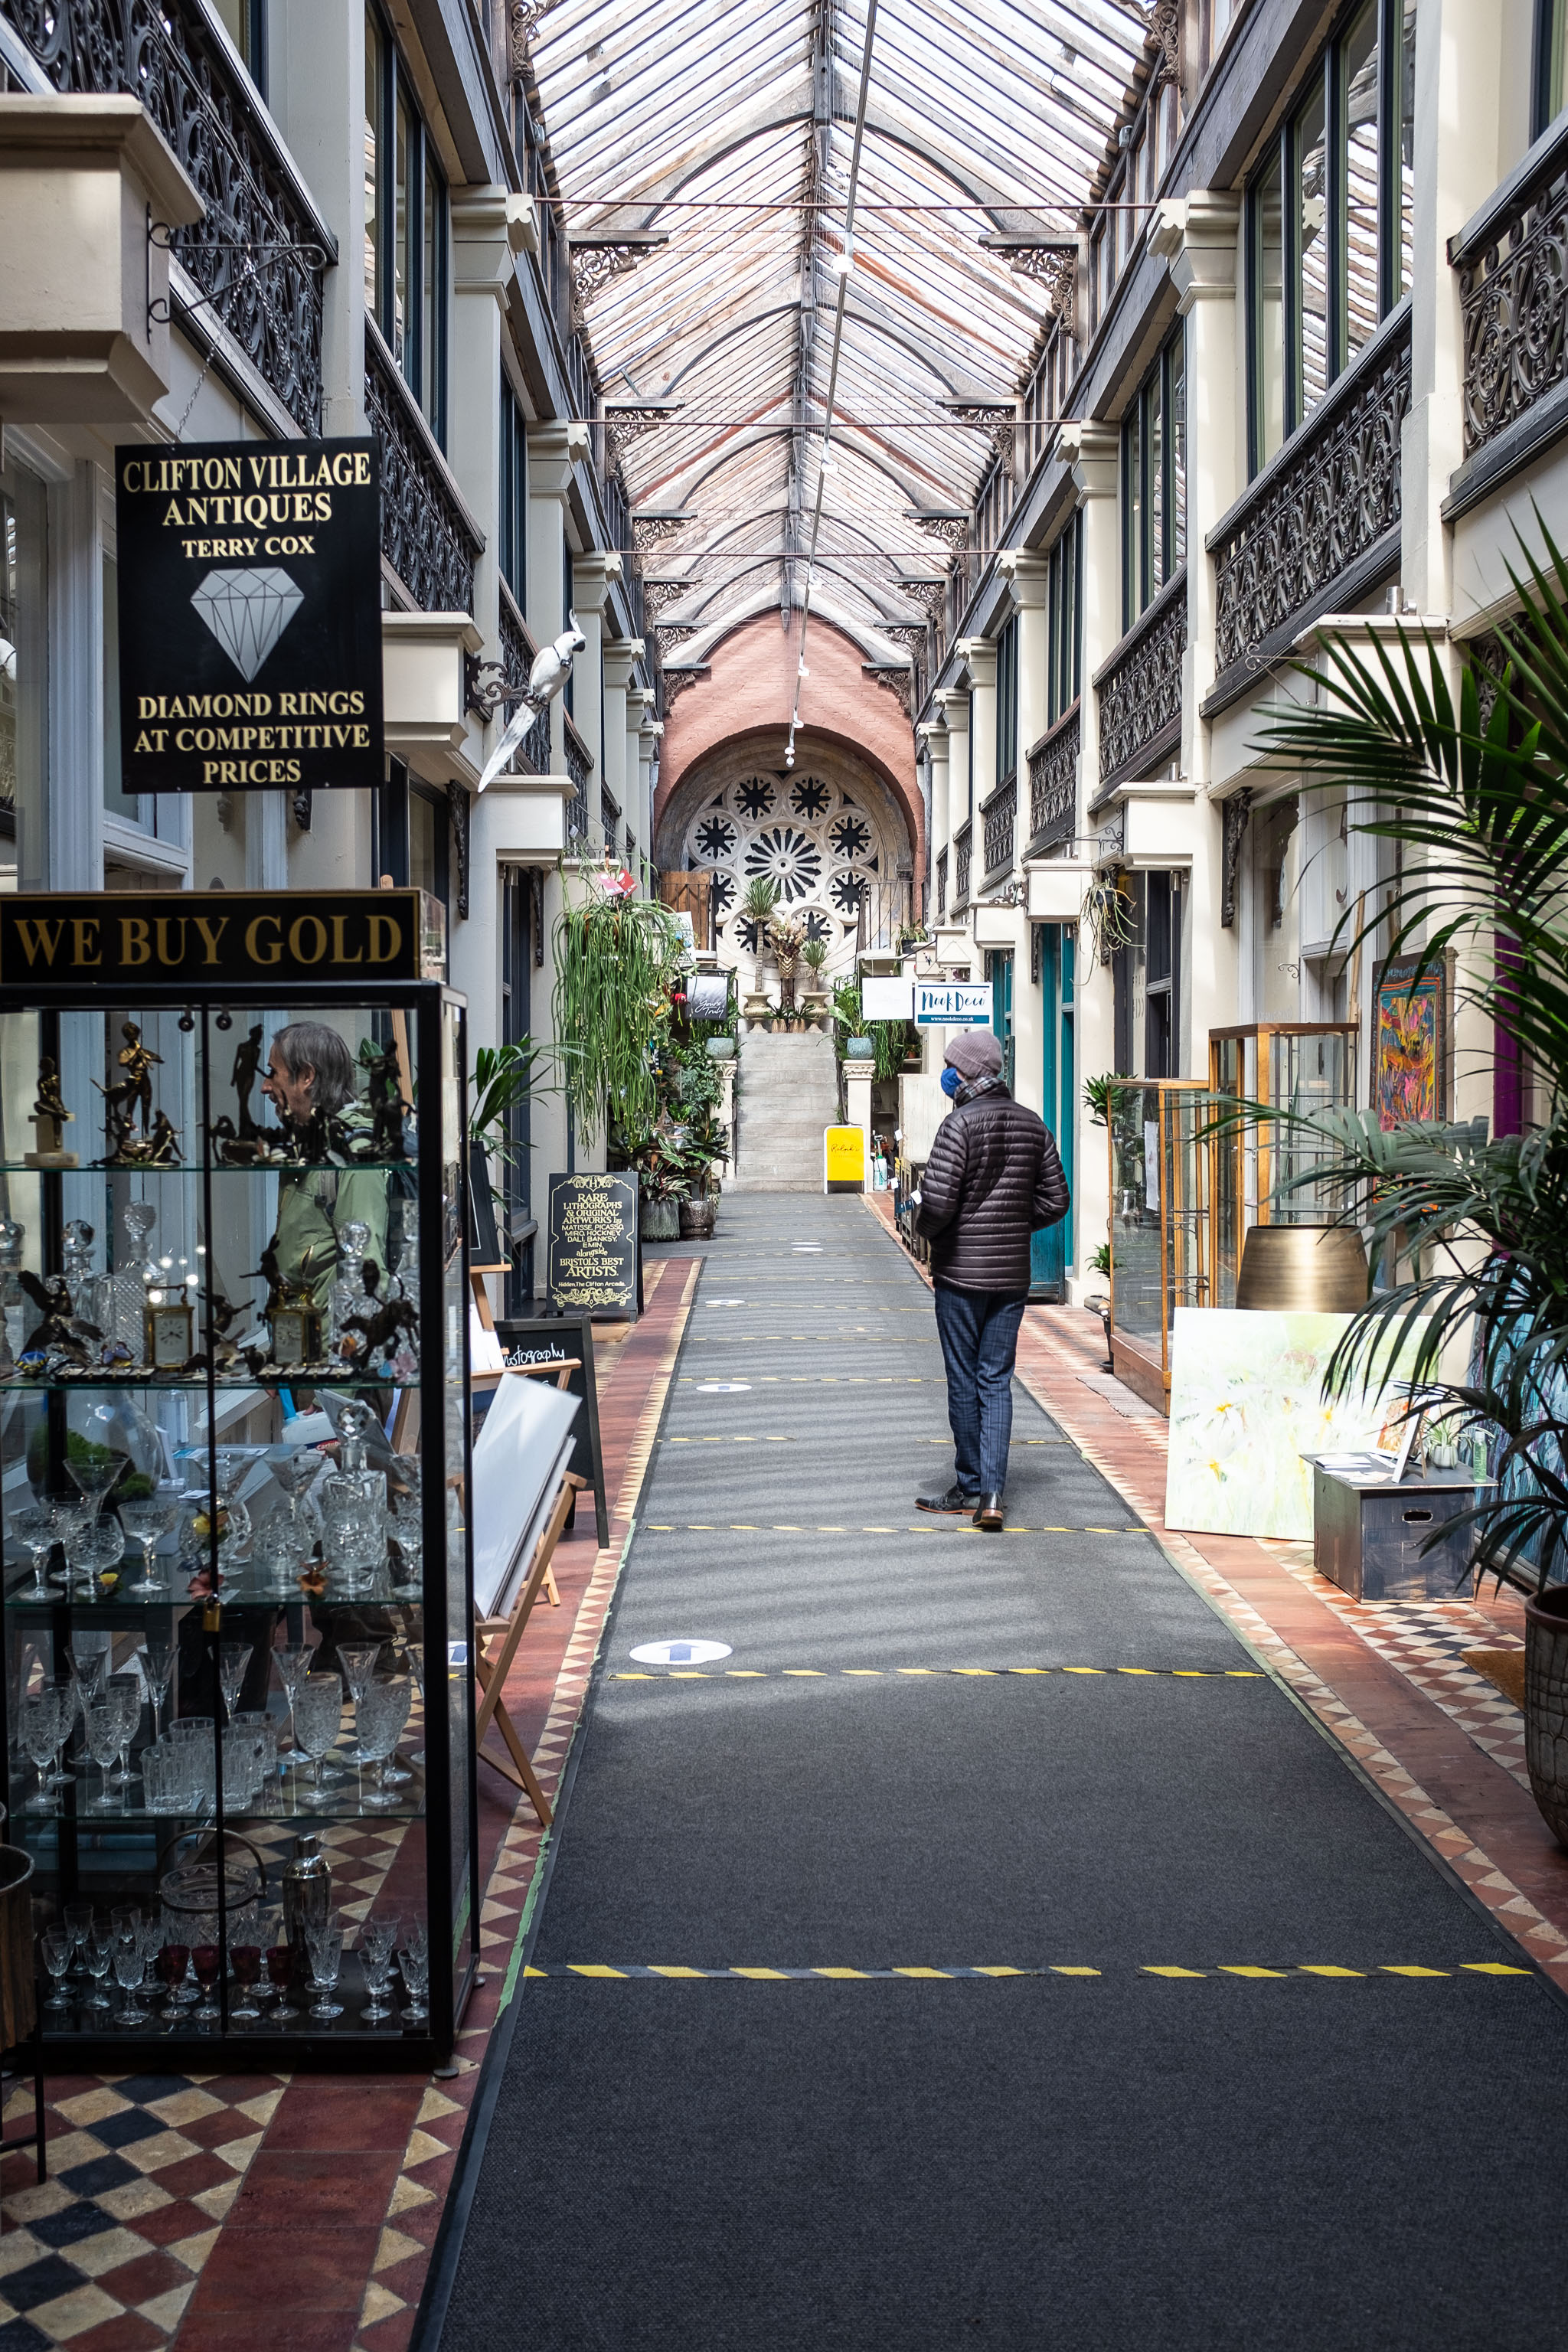 Clifton Arcade
Built between 1876 and 1878, the "King's Clifton Bazaar and Winter Garden opened on April 7th, 1879. It was an instant flop - it became known as Ki...